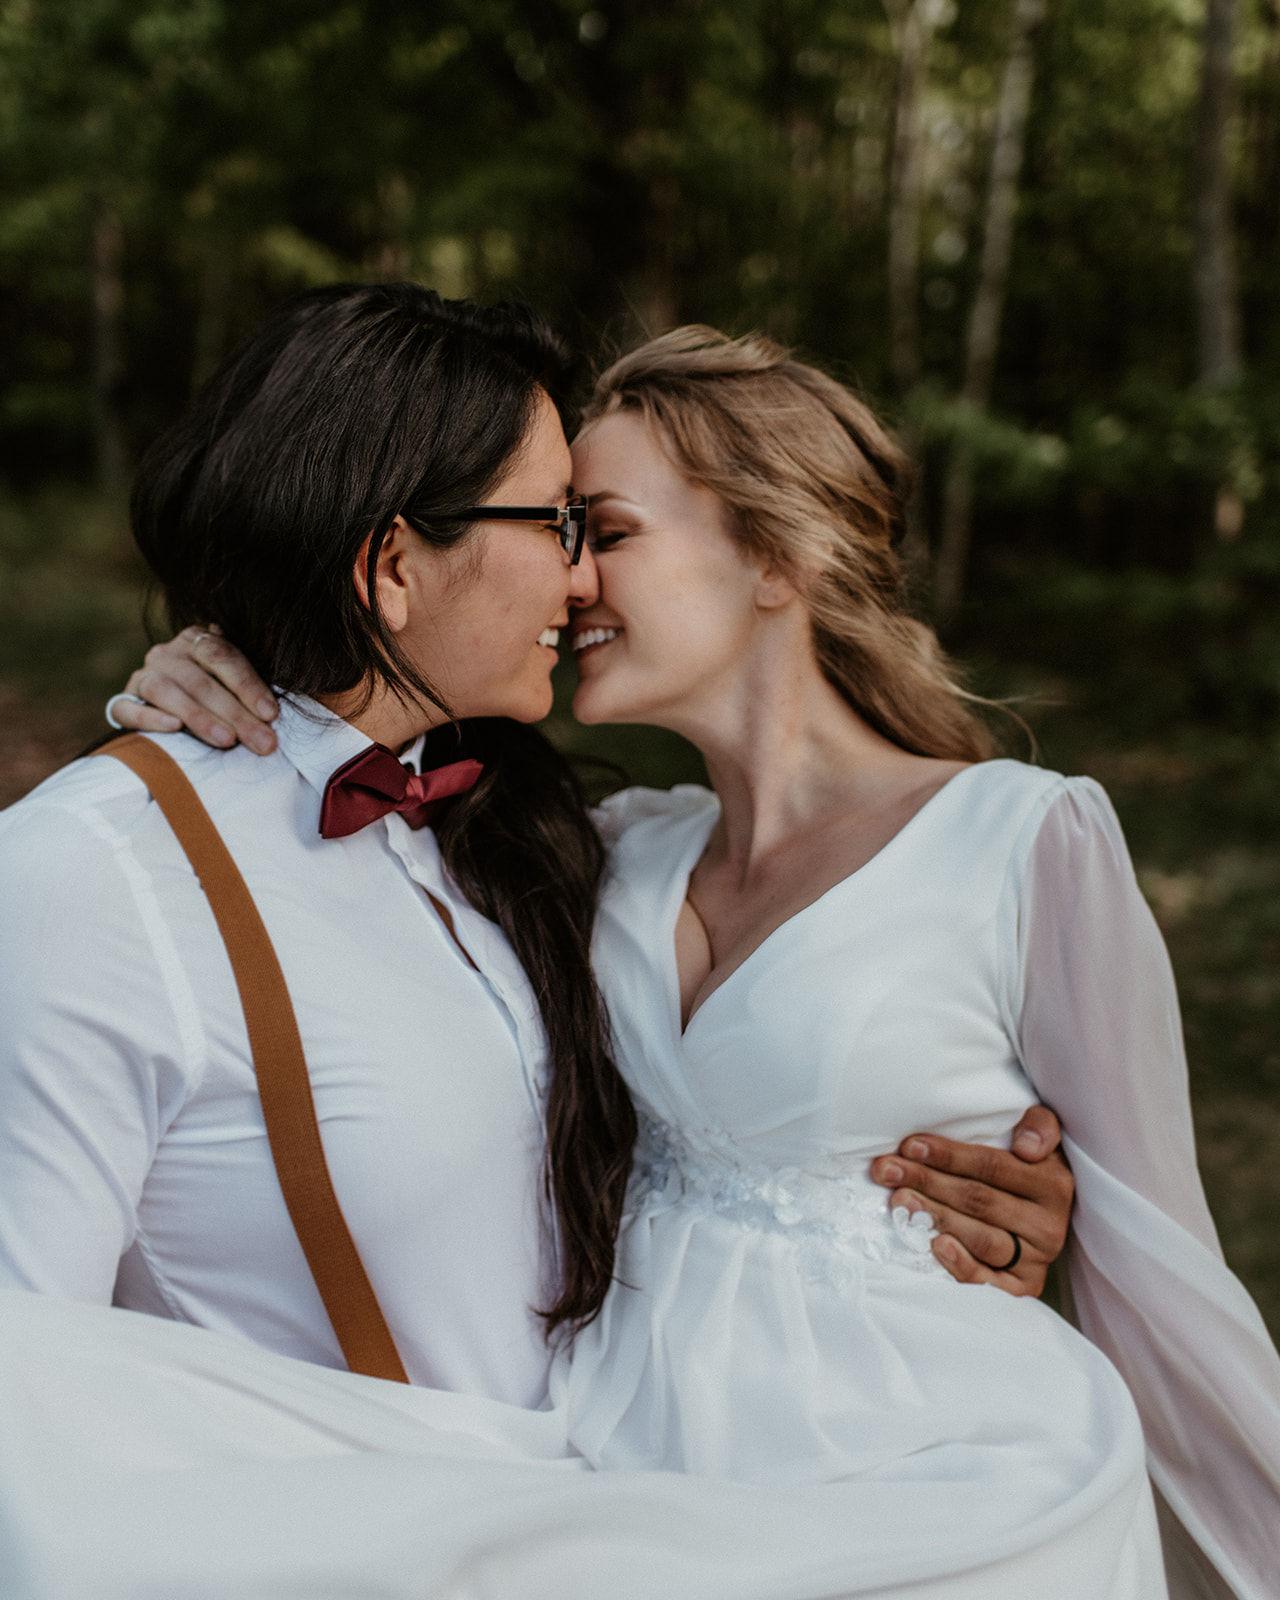 Brides kiss during portraits at their New Hampshire Elopement